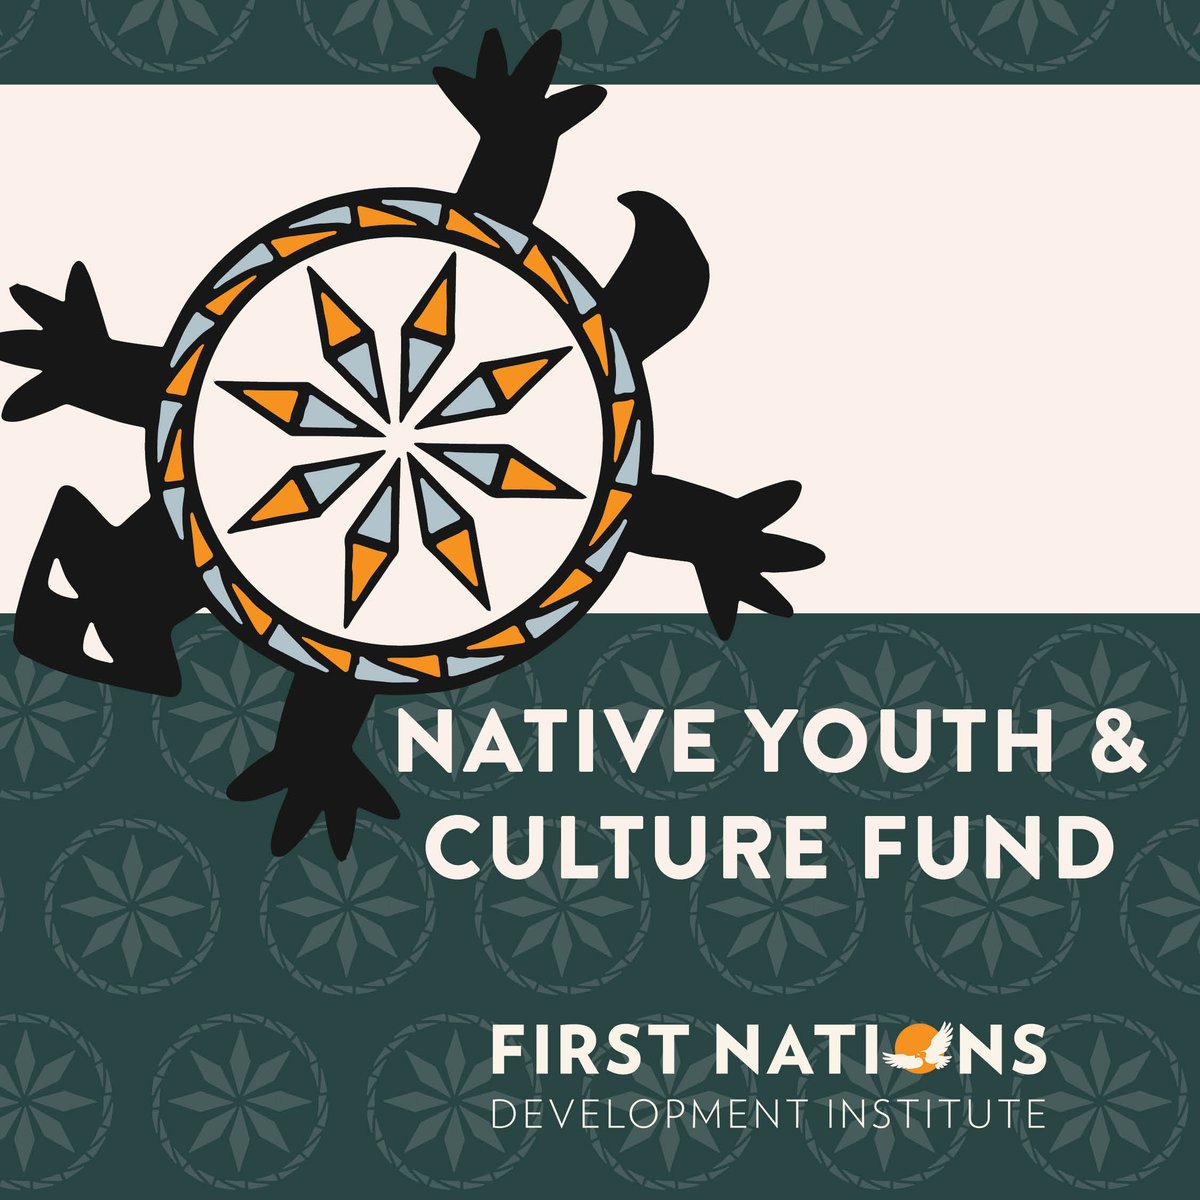 REMINDER: Join us tomorrow (5/13) for a Q&A webinar about our Native Youth and Culture Fund Grant Opportunity. We're awarding two-year grants from $20-60k to #NativeYouth programs focused on leadership and intergenerational knowledge. Register now: bit.ly/3PfrNfp